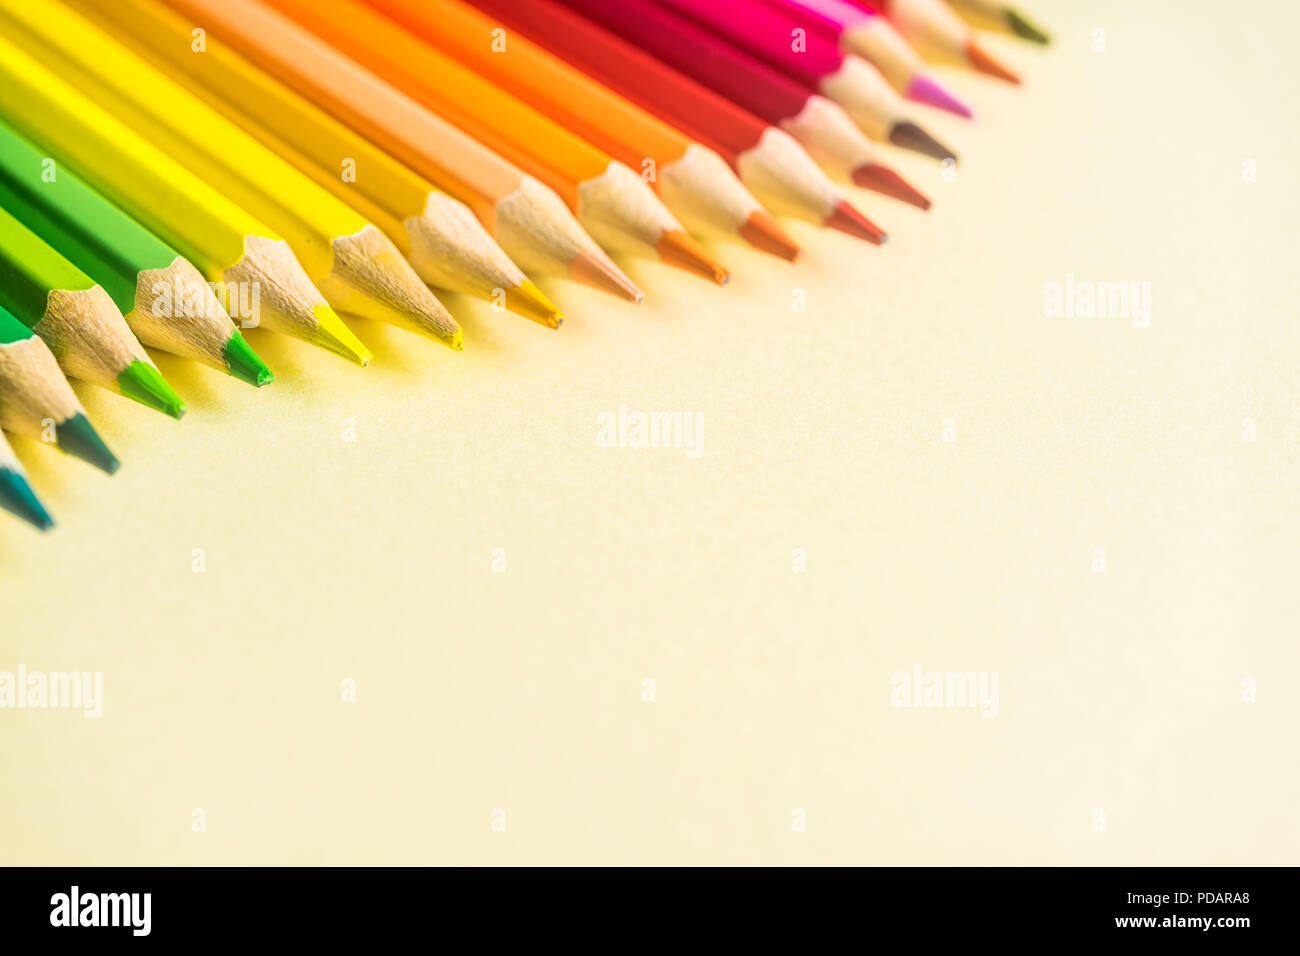 Download Art Concept Top View Of Color Pencil Wave On Yellow Paper Background For Mockup Design Stock Photo Alamy PSD Mockup Templates